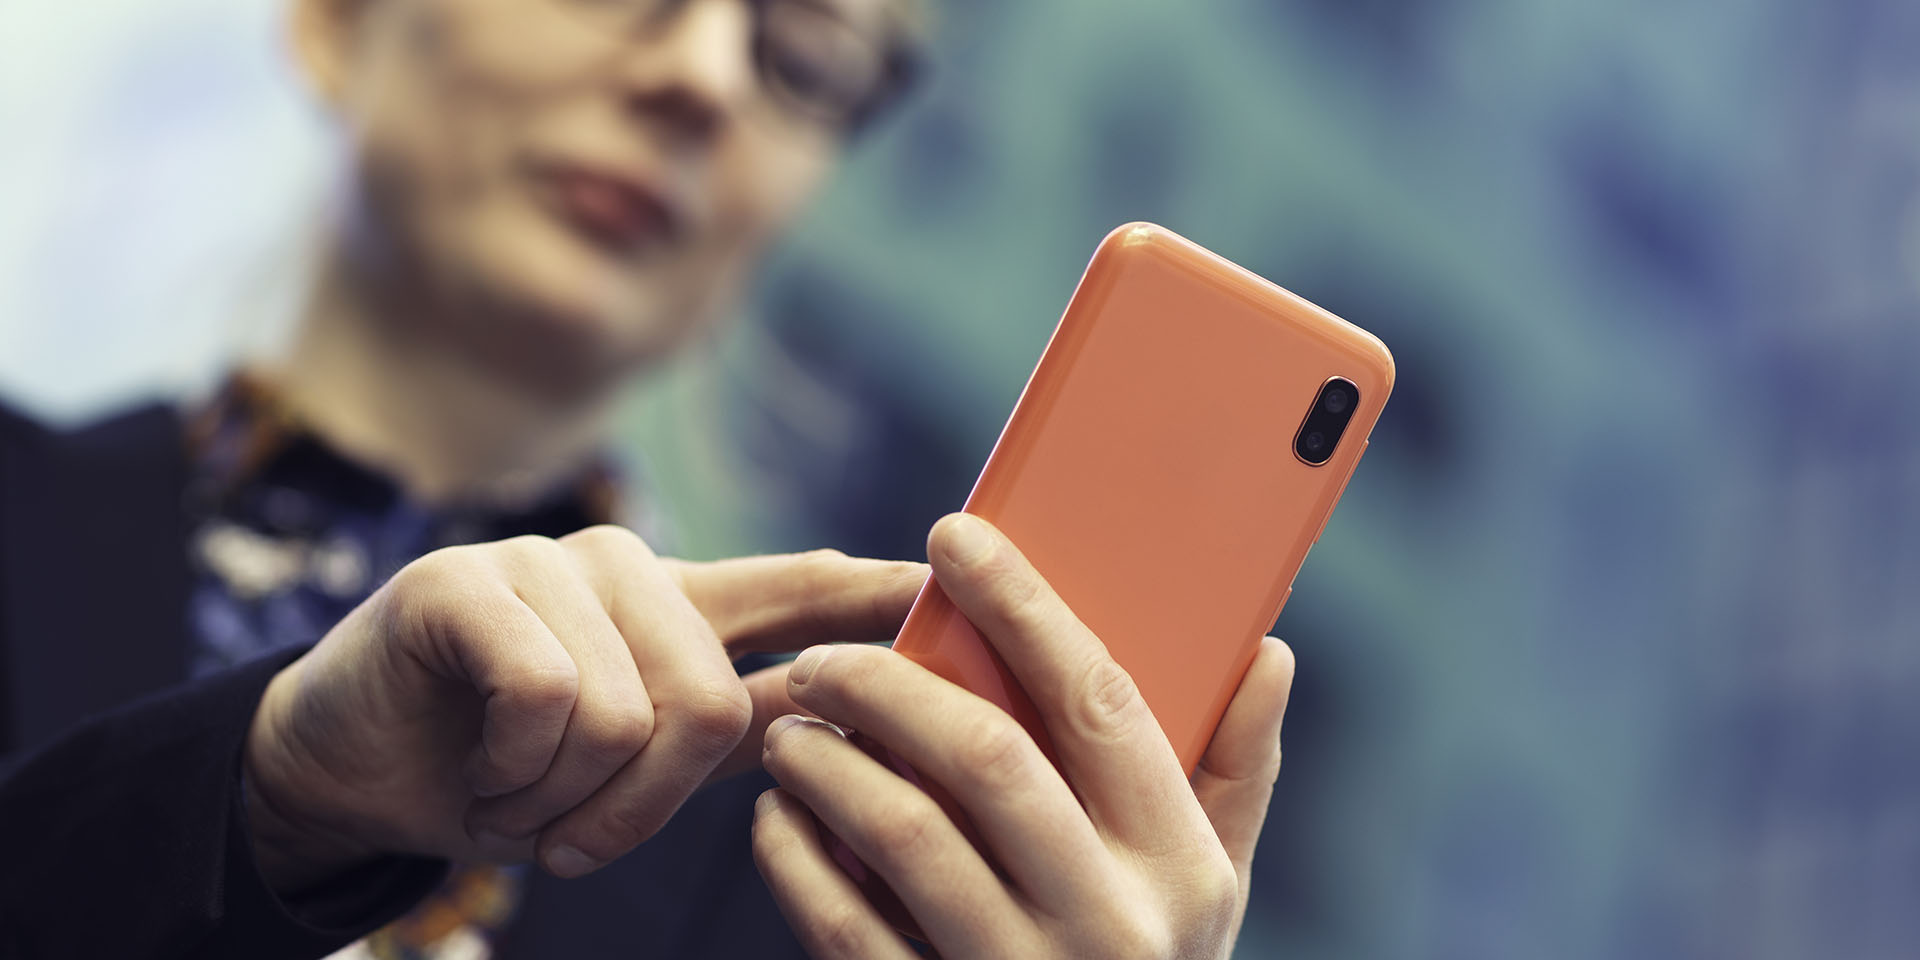 Close up image of a woman using a smart phone, with focus on the phone